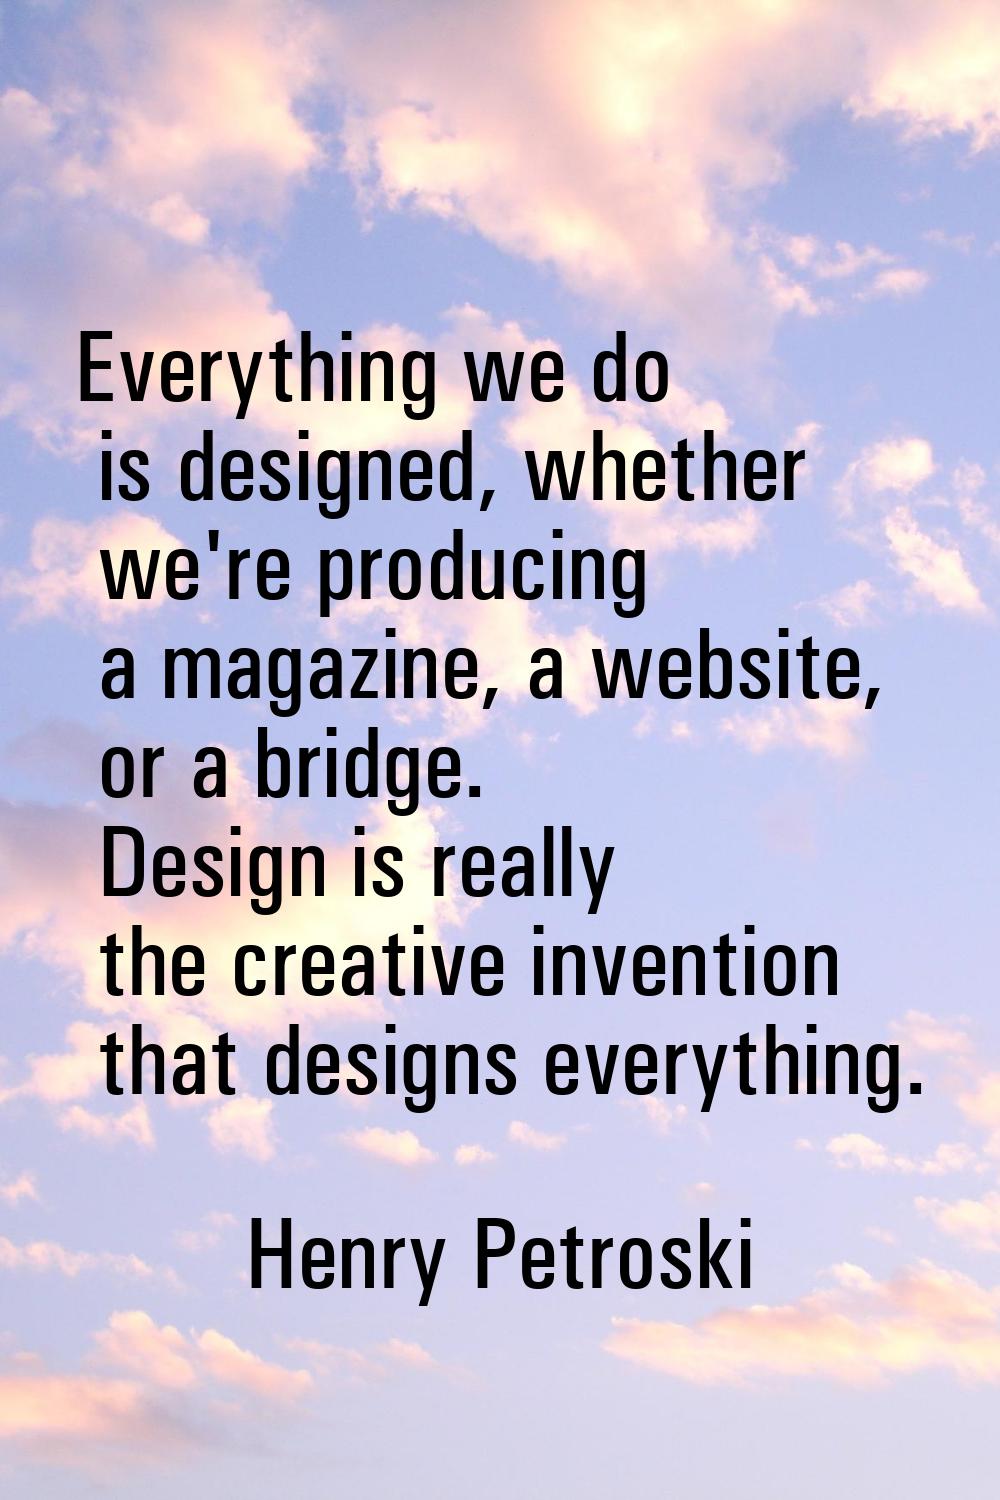 Everything we do is designed, whether we're producing a magazine, a website, or a bridge. Design is